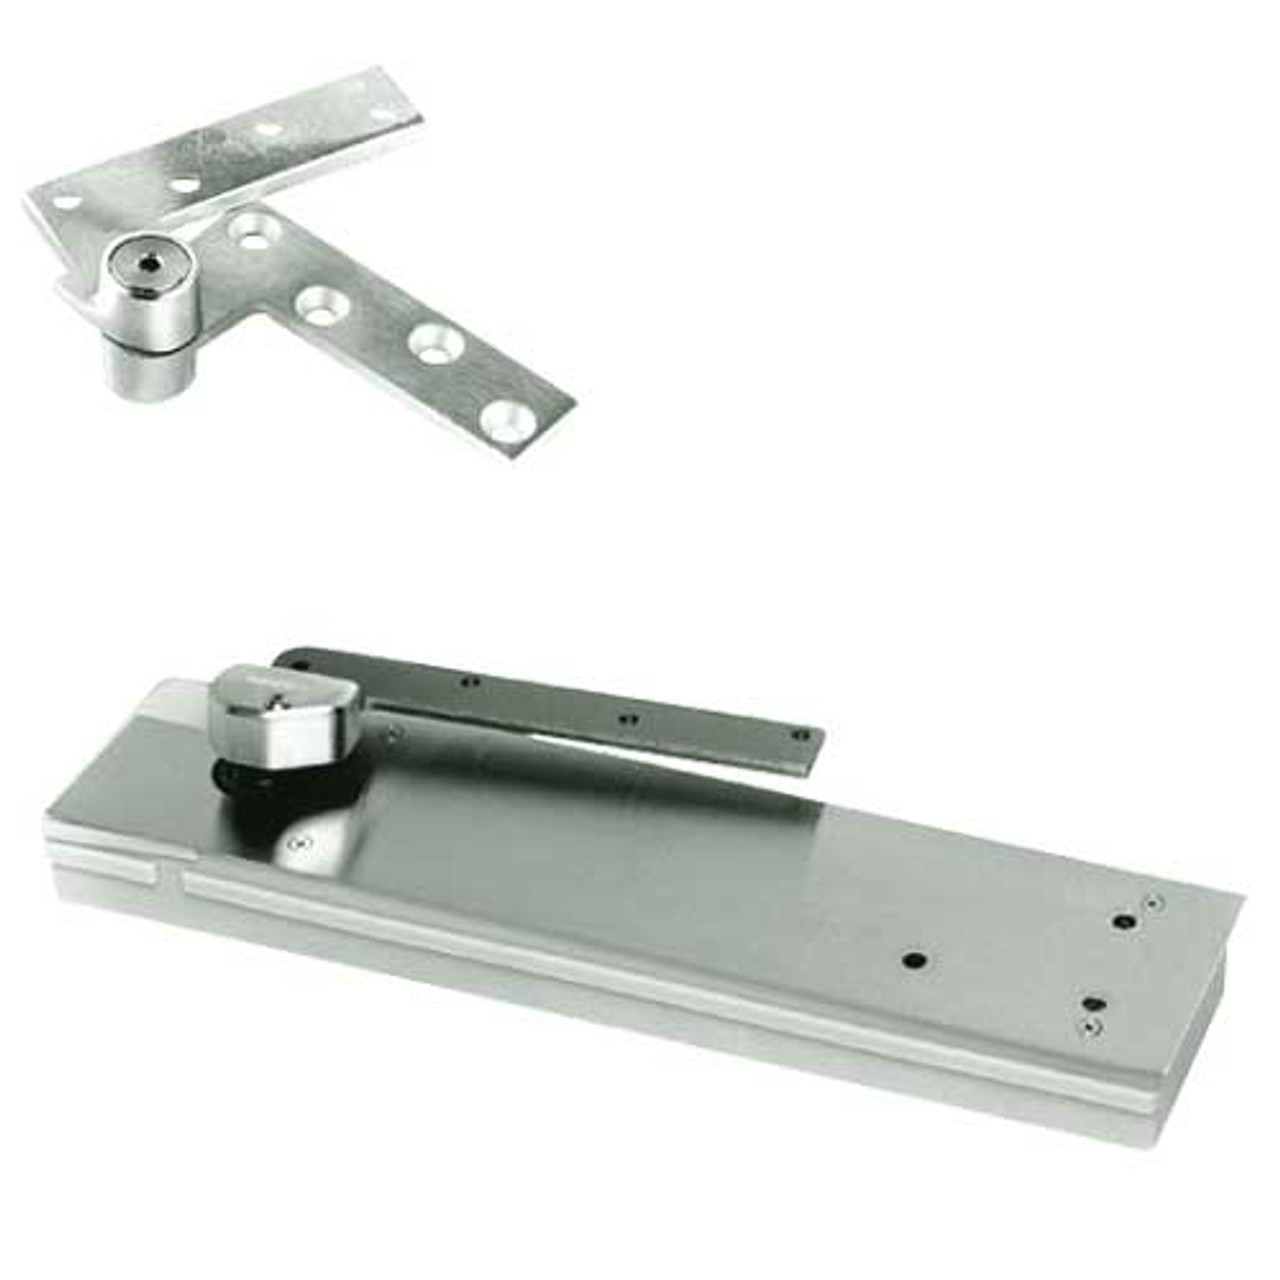 5103ABC180-1-1/2OS-LFP-LCC-RH-618 Rixson 51 Series 1-1/2" Offset Hung Shallow Depth Floor Closers in Bright Nickel Finish